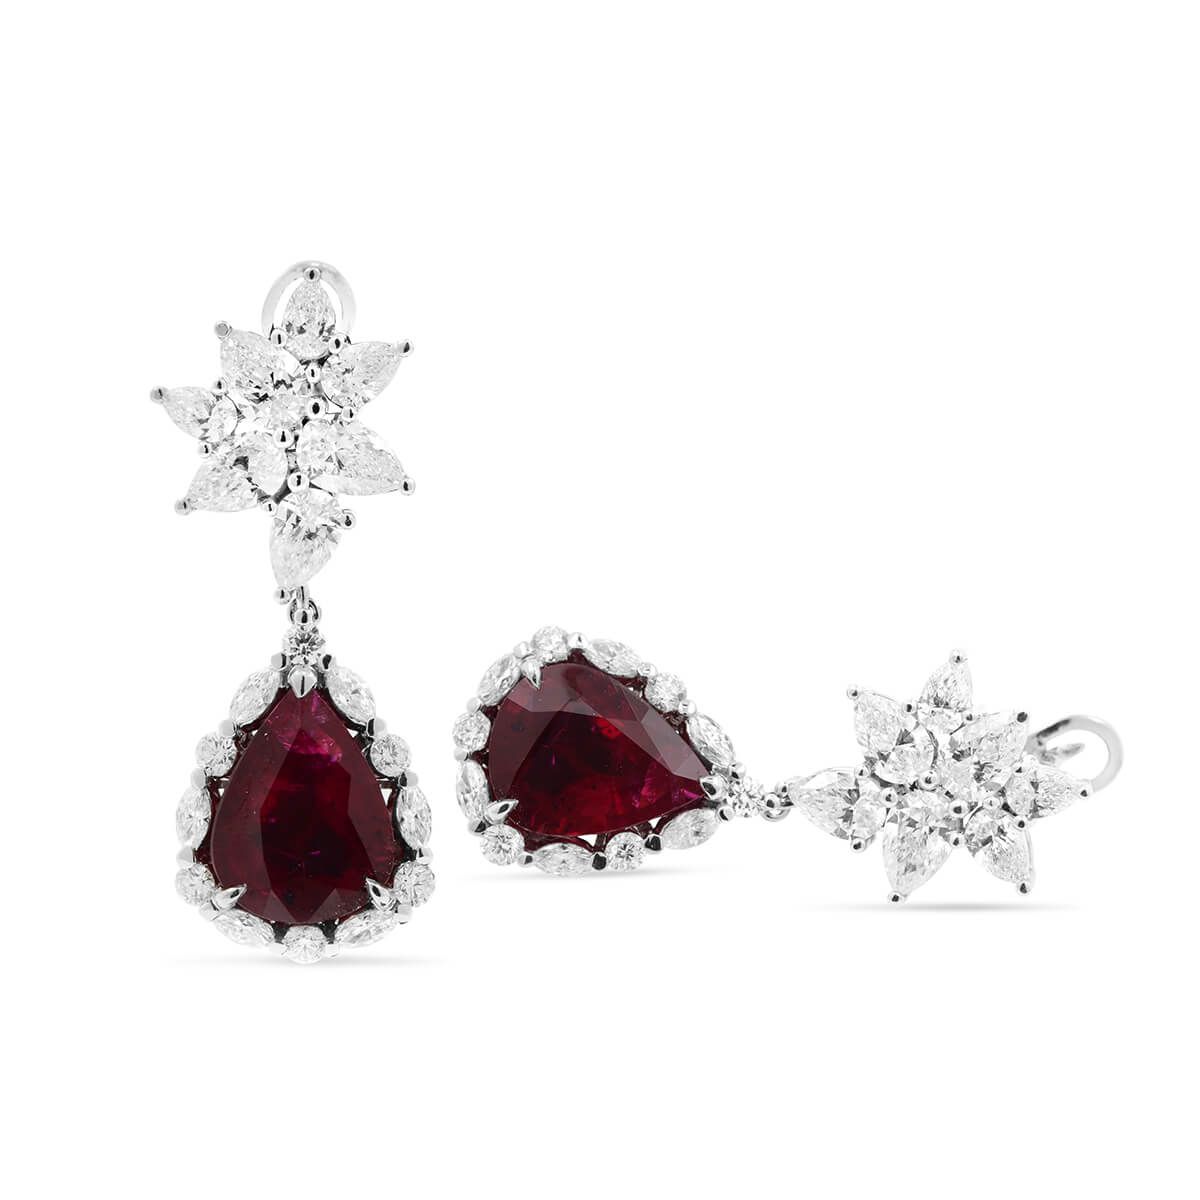 Natural Vivid Red Mozambique Ruby Earrings, 12.14 Ct. (17.55 Ct. TW), GRS Certified, JCEG01061722, Unheated